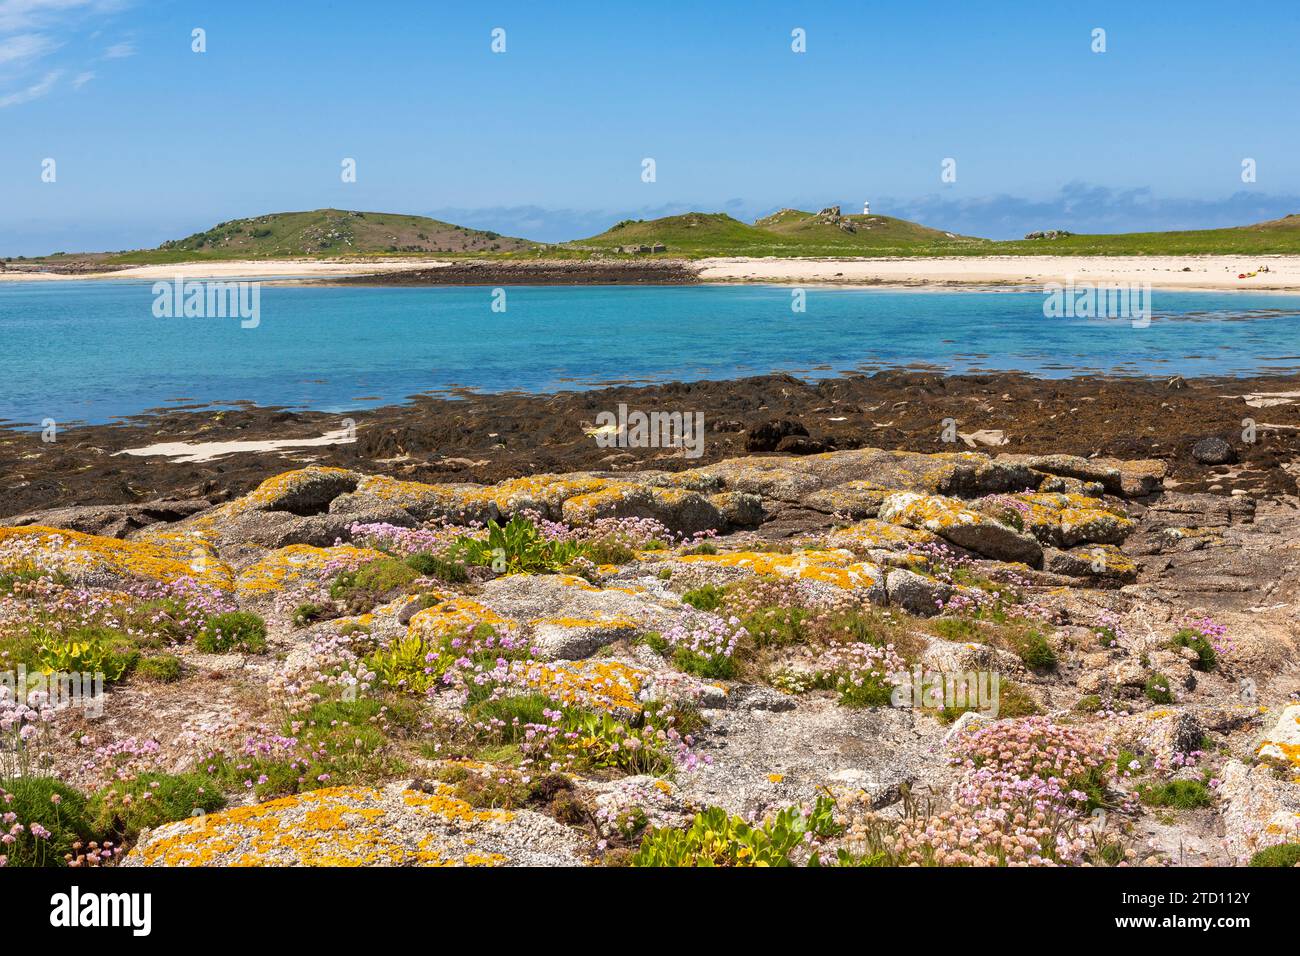 Low tide beach at East Porth, on the uninhabited island of Teän, Isles of Scilly, UK, with sea beet and thrift growing in the rocks in the foreground Stock Photo